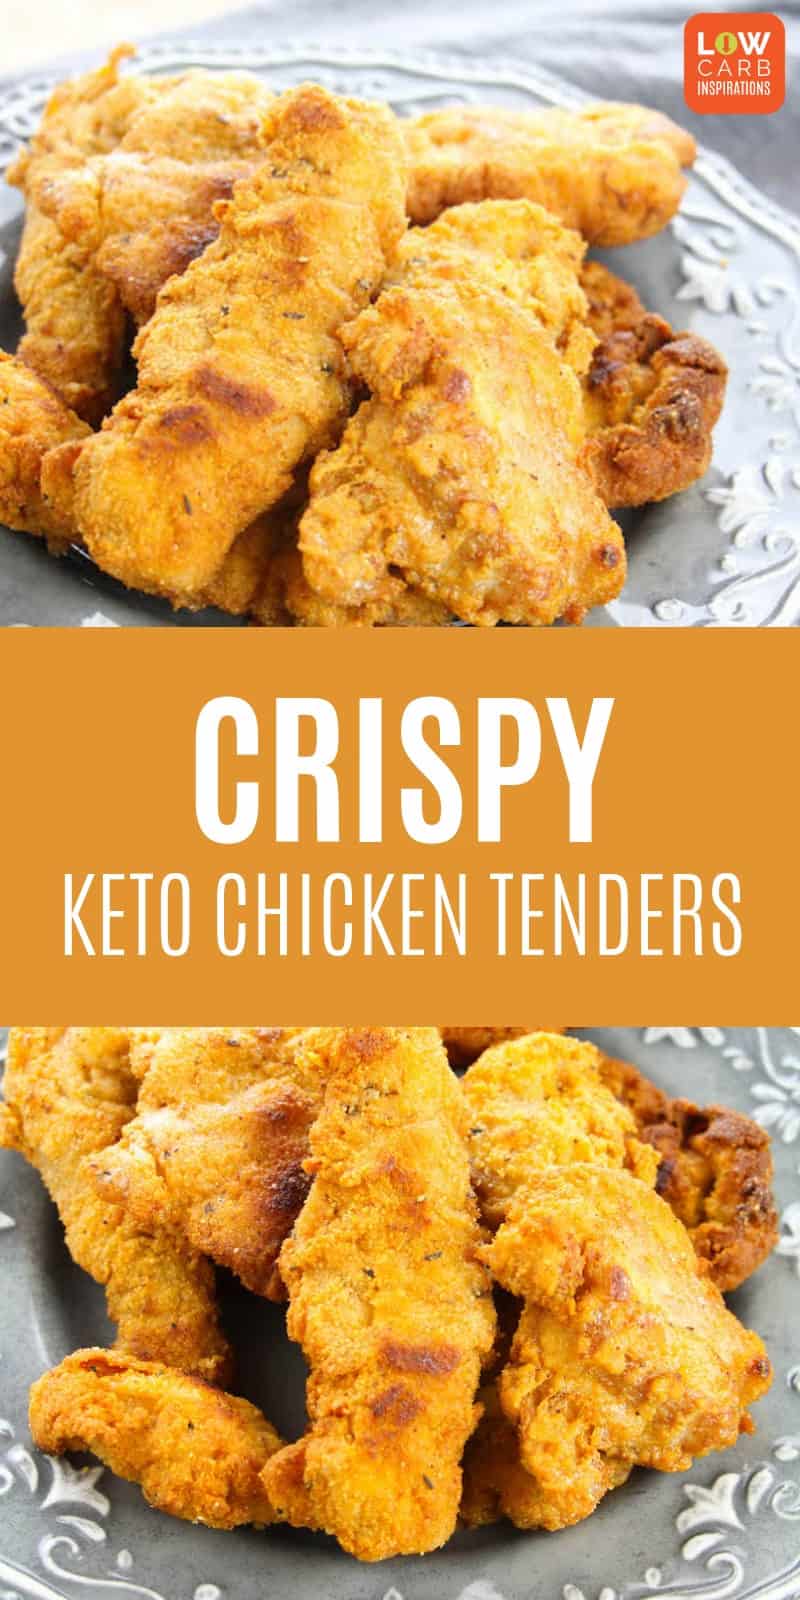 Crispy Keto Chicken Tenders Low Carb Inspirations